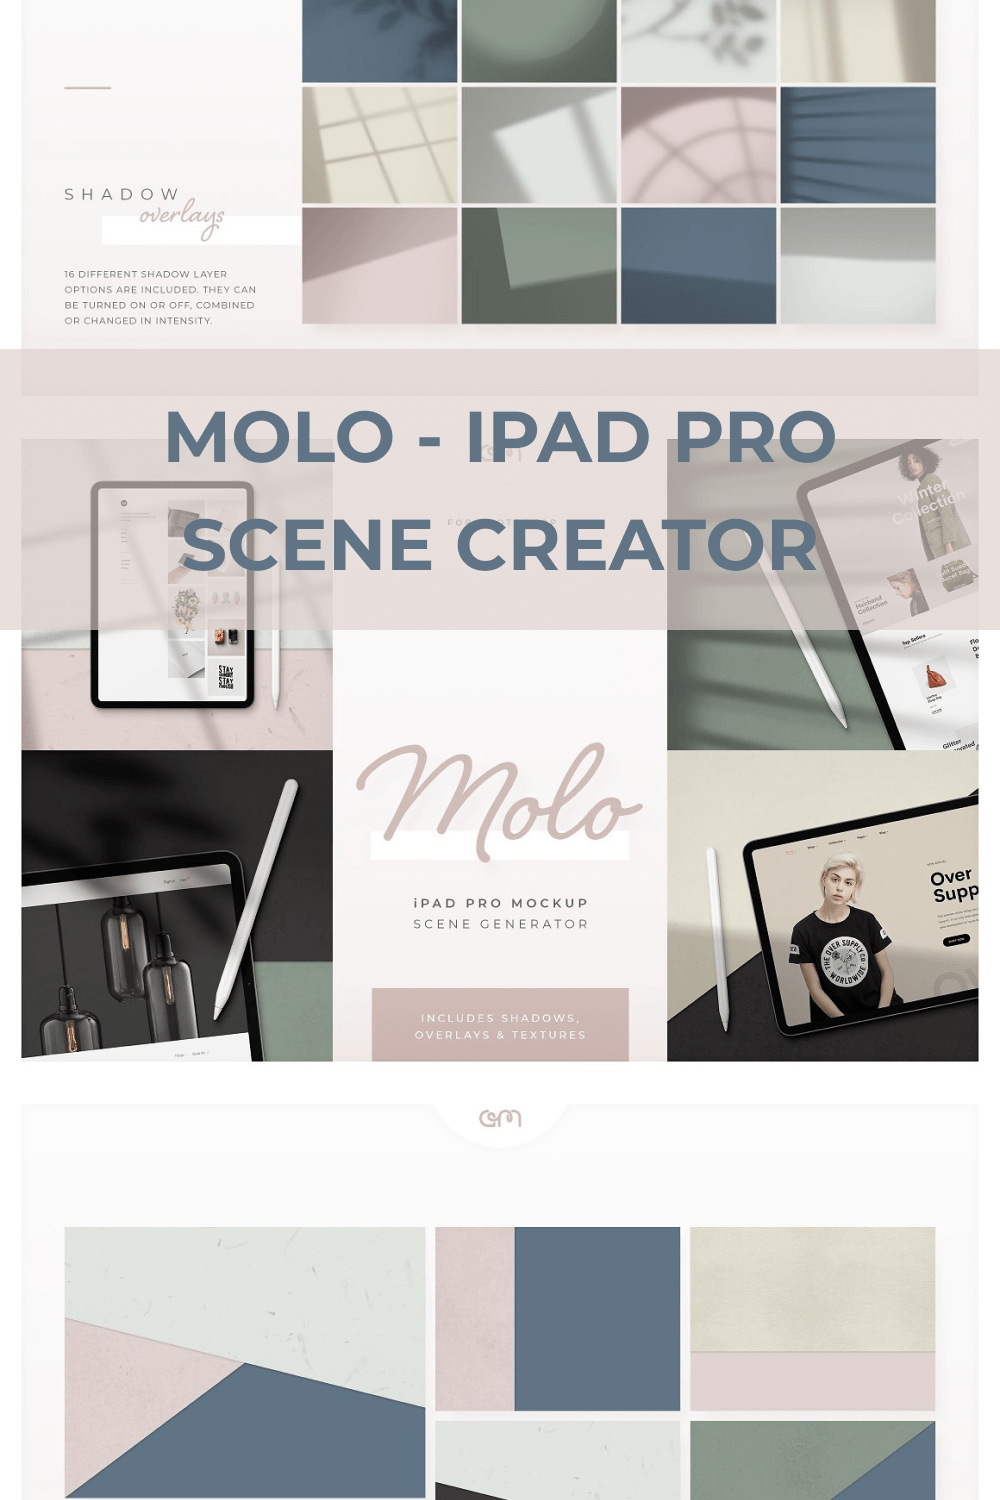 Molo Includes Shadows, Overlays and Textures.